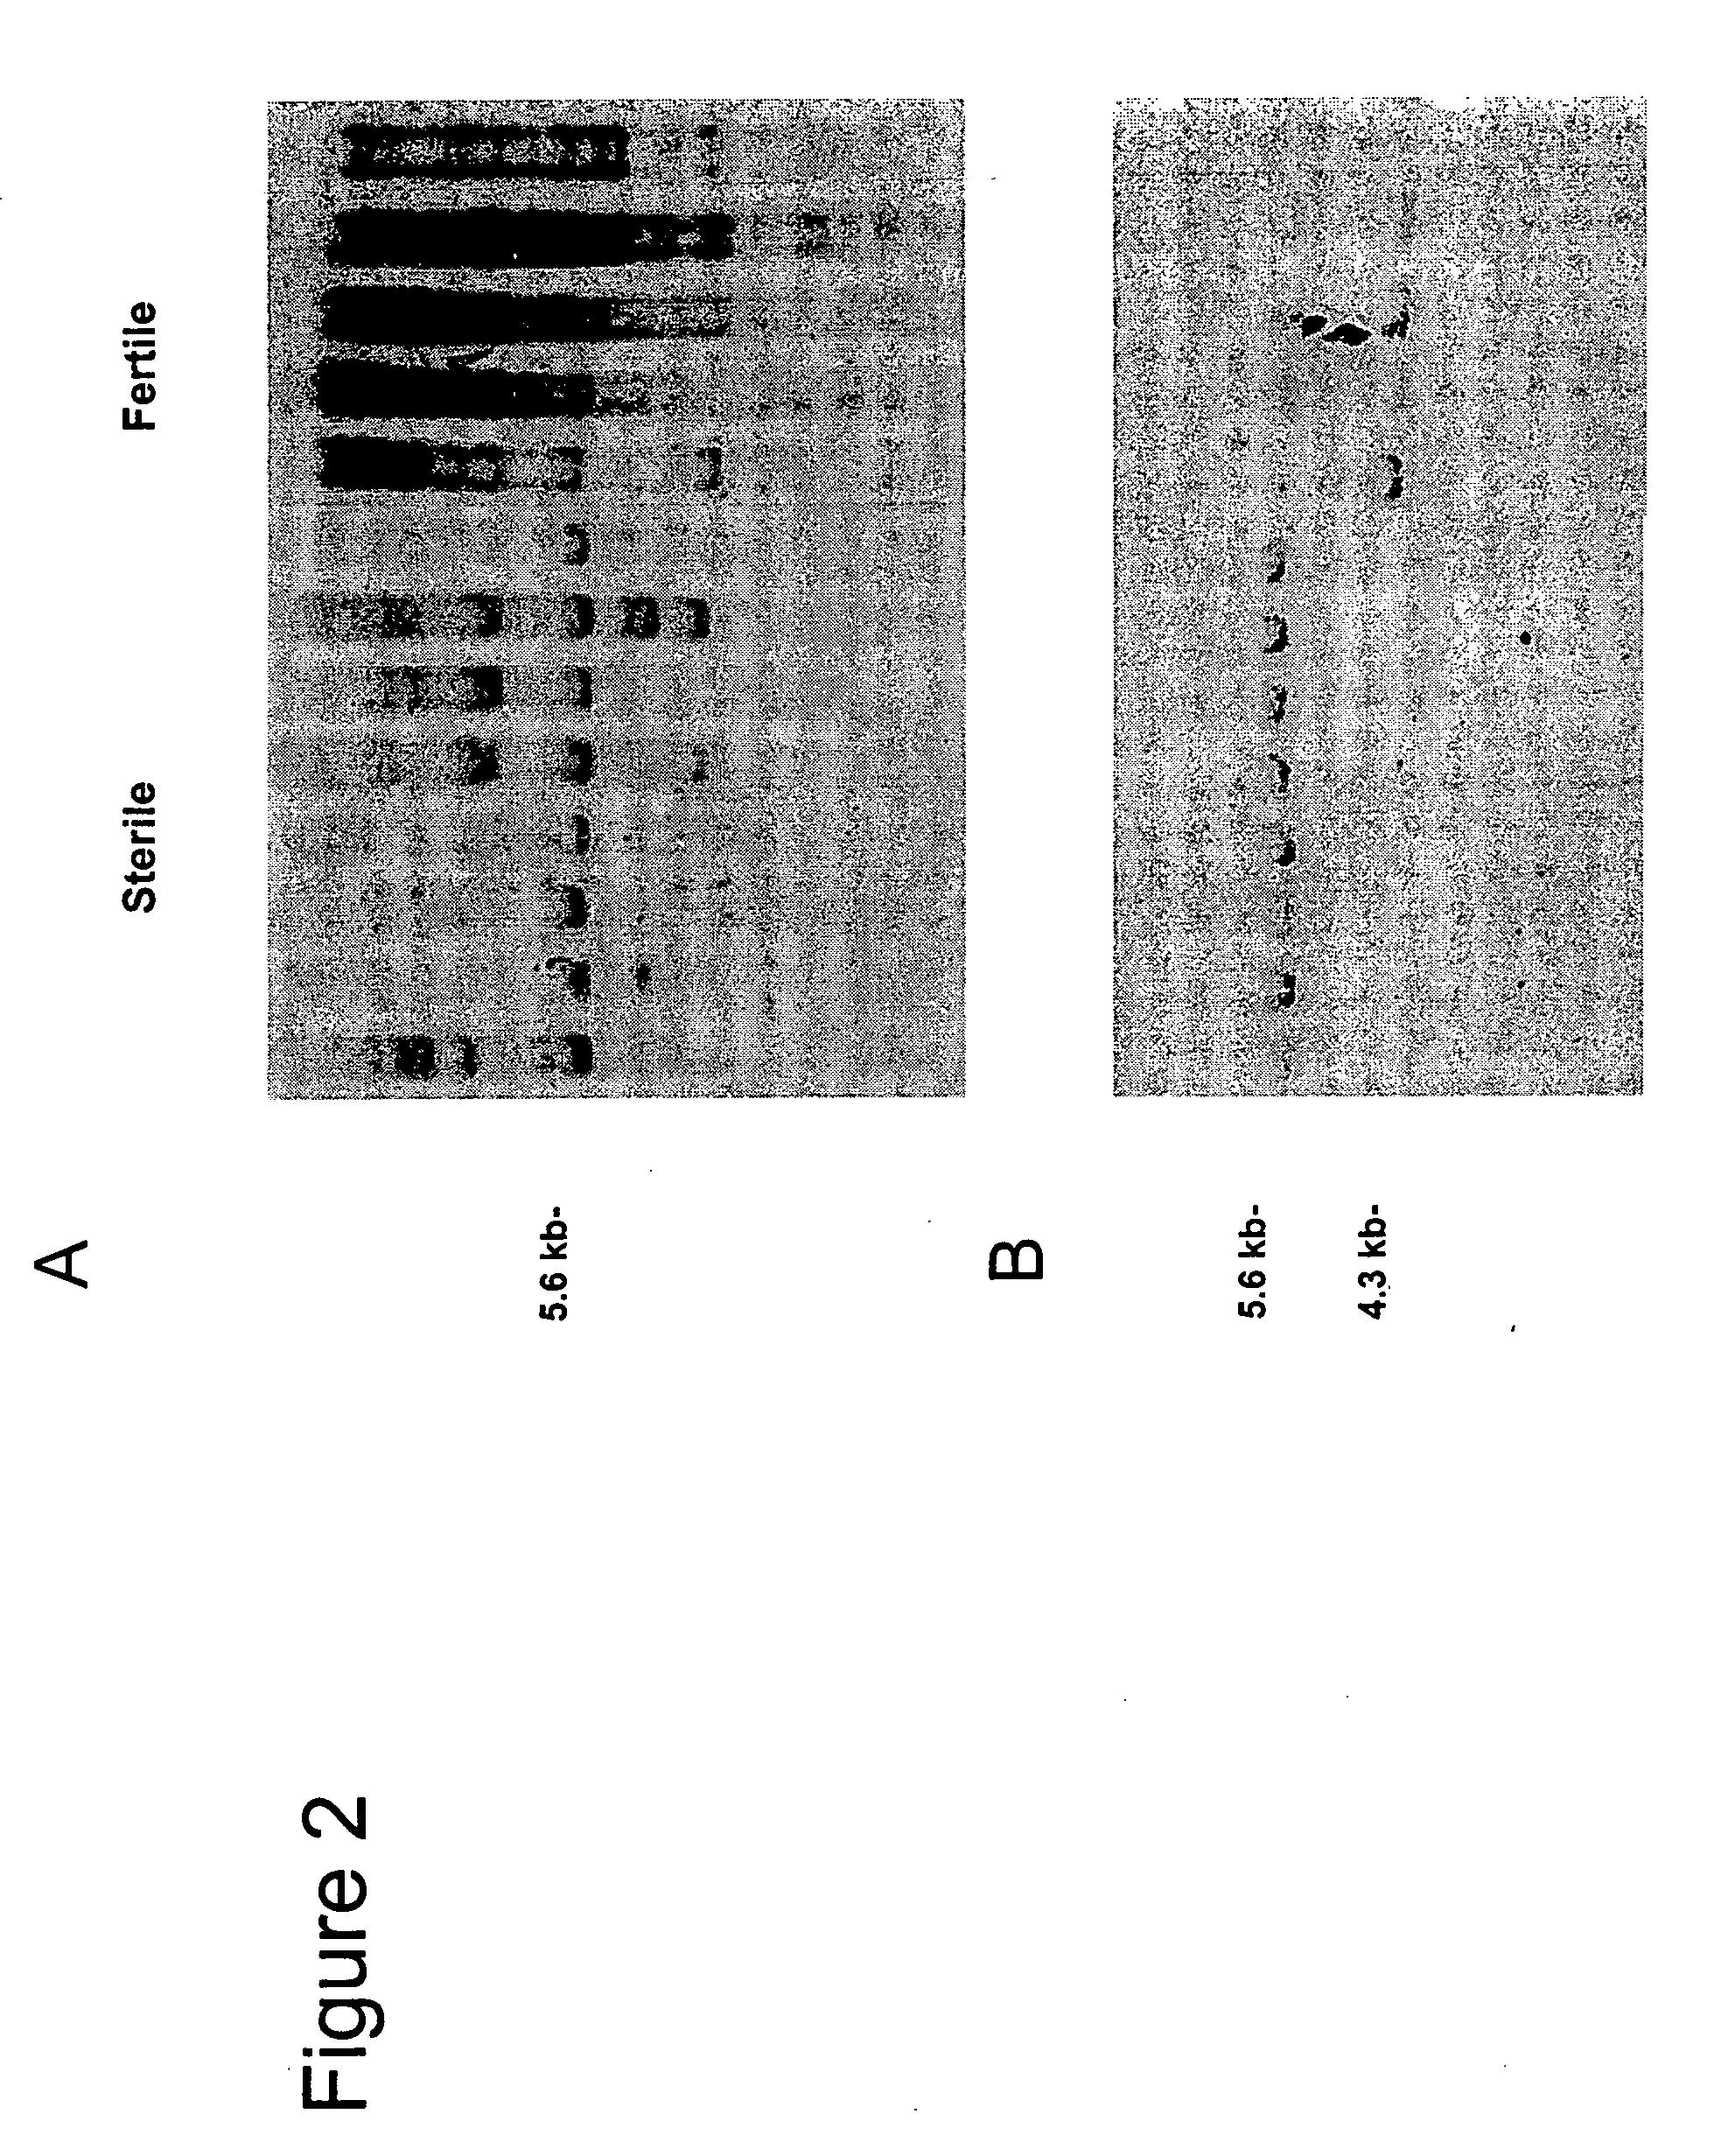 Nucleotide sequences mediating male fertility and method of using same